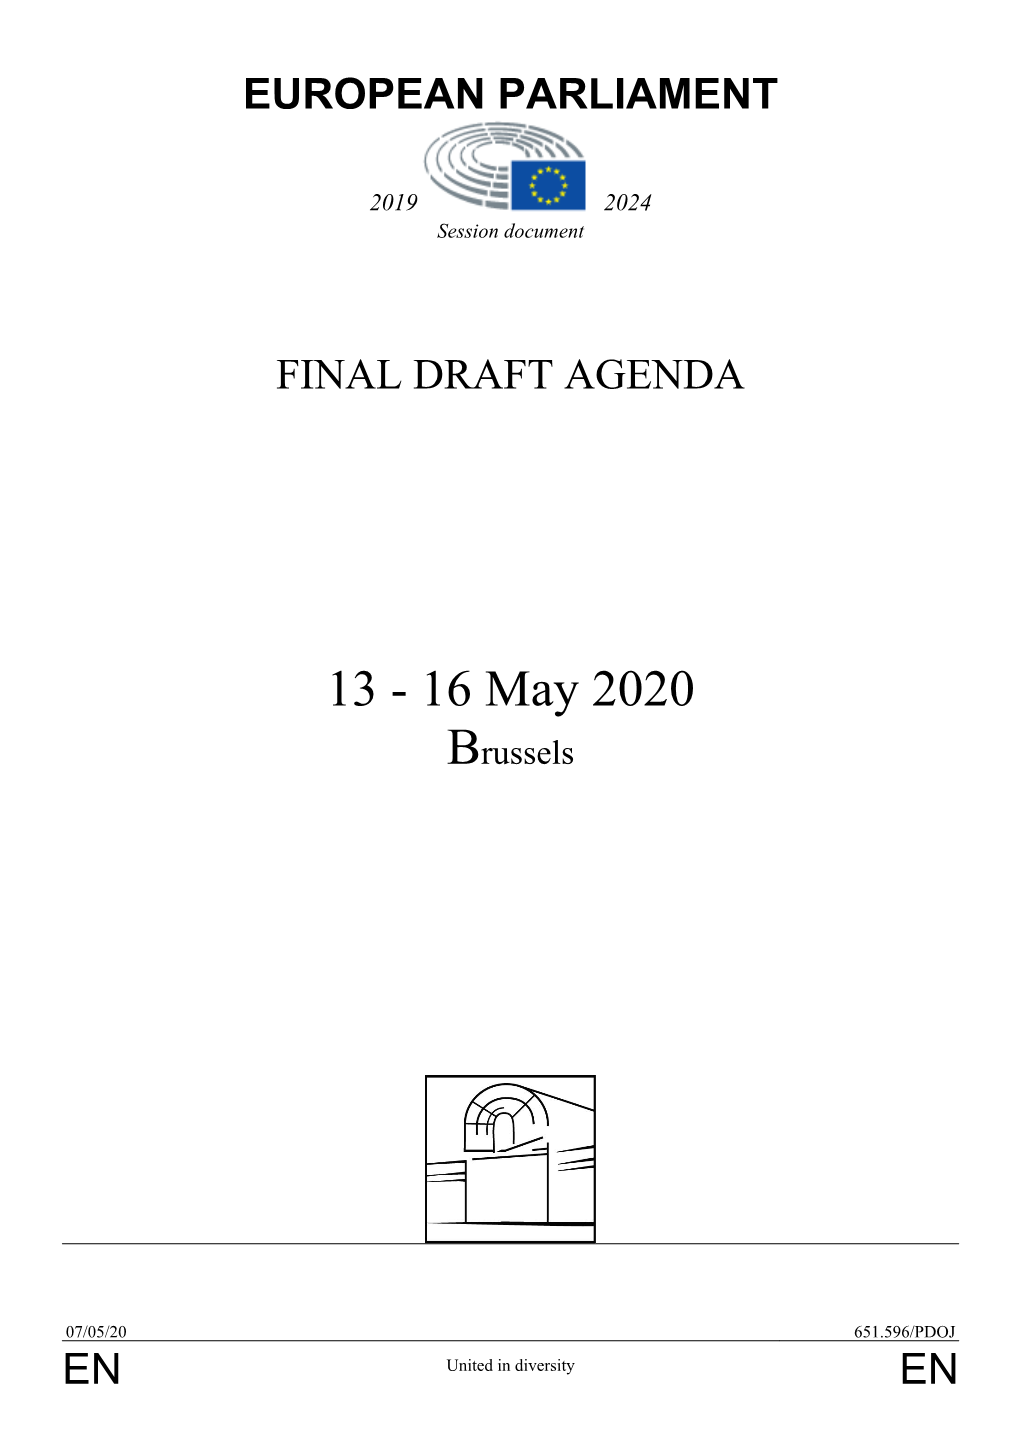 13 - 16 May 2020 Brussels